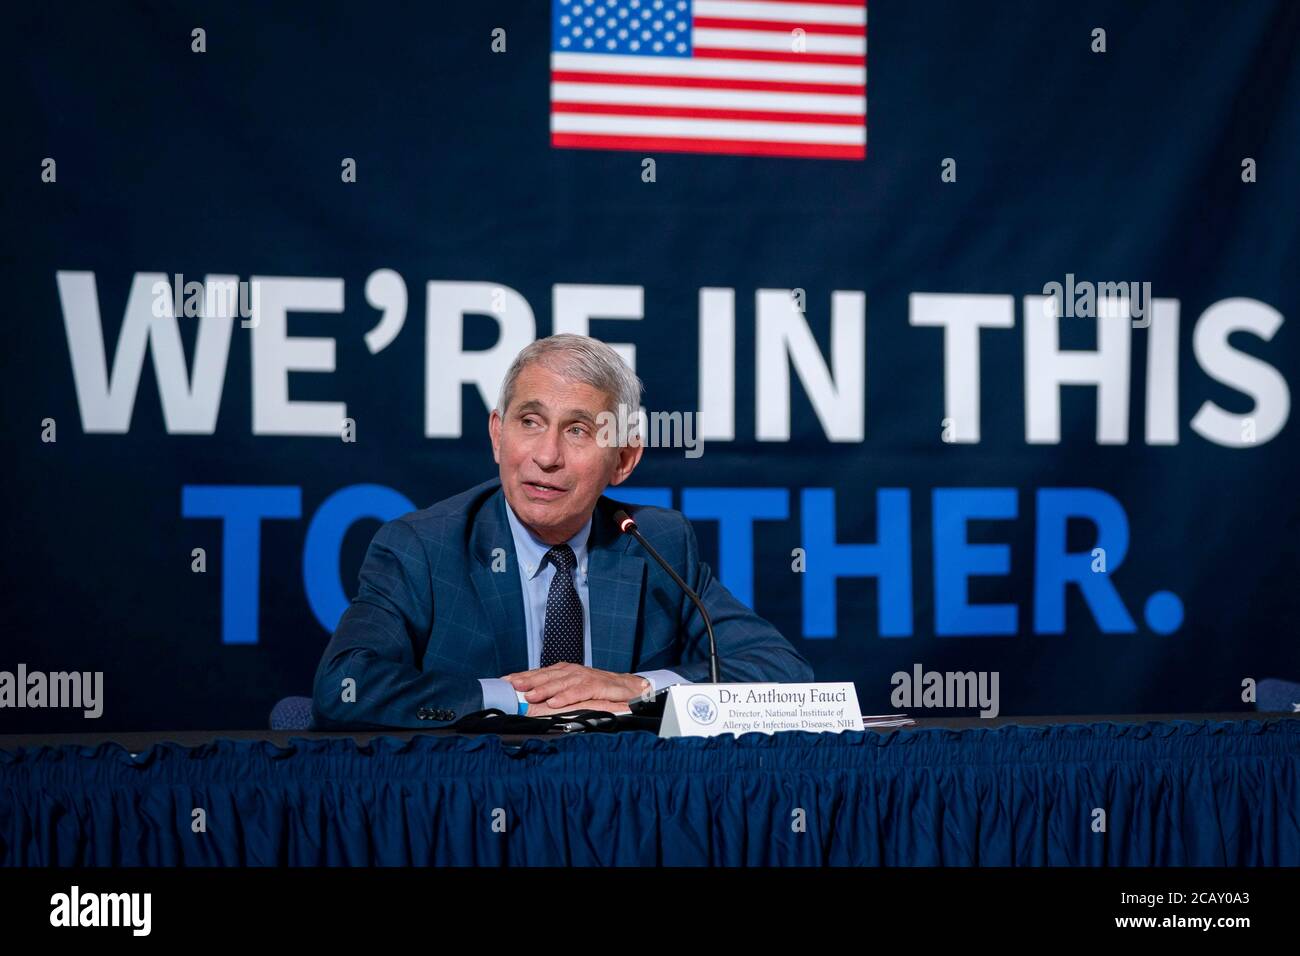 Dr. Anthony Fauci, Director of National Institute of Allergy and Infectious Diseases, addresses a roundtable on donating plasma at the American Red Cross National Headquarters July 30, 2020 in Washington, DC. Stock Photo